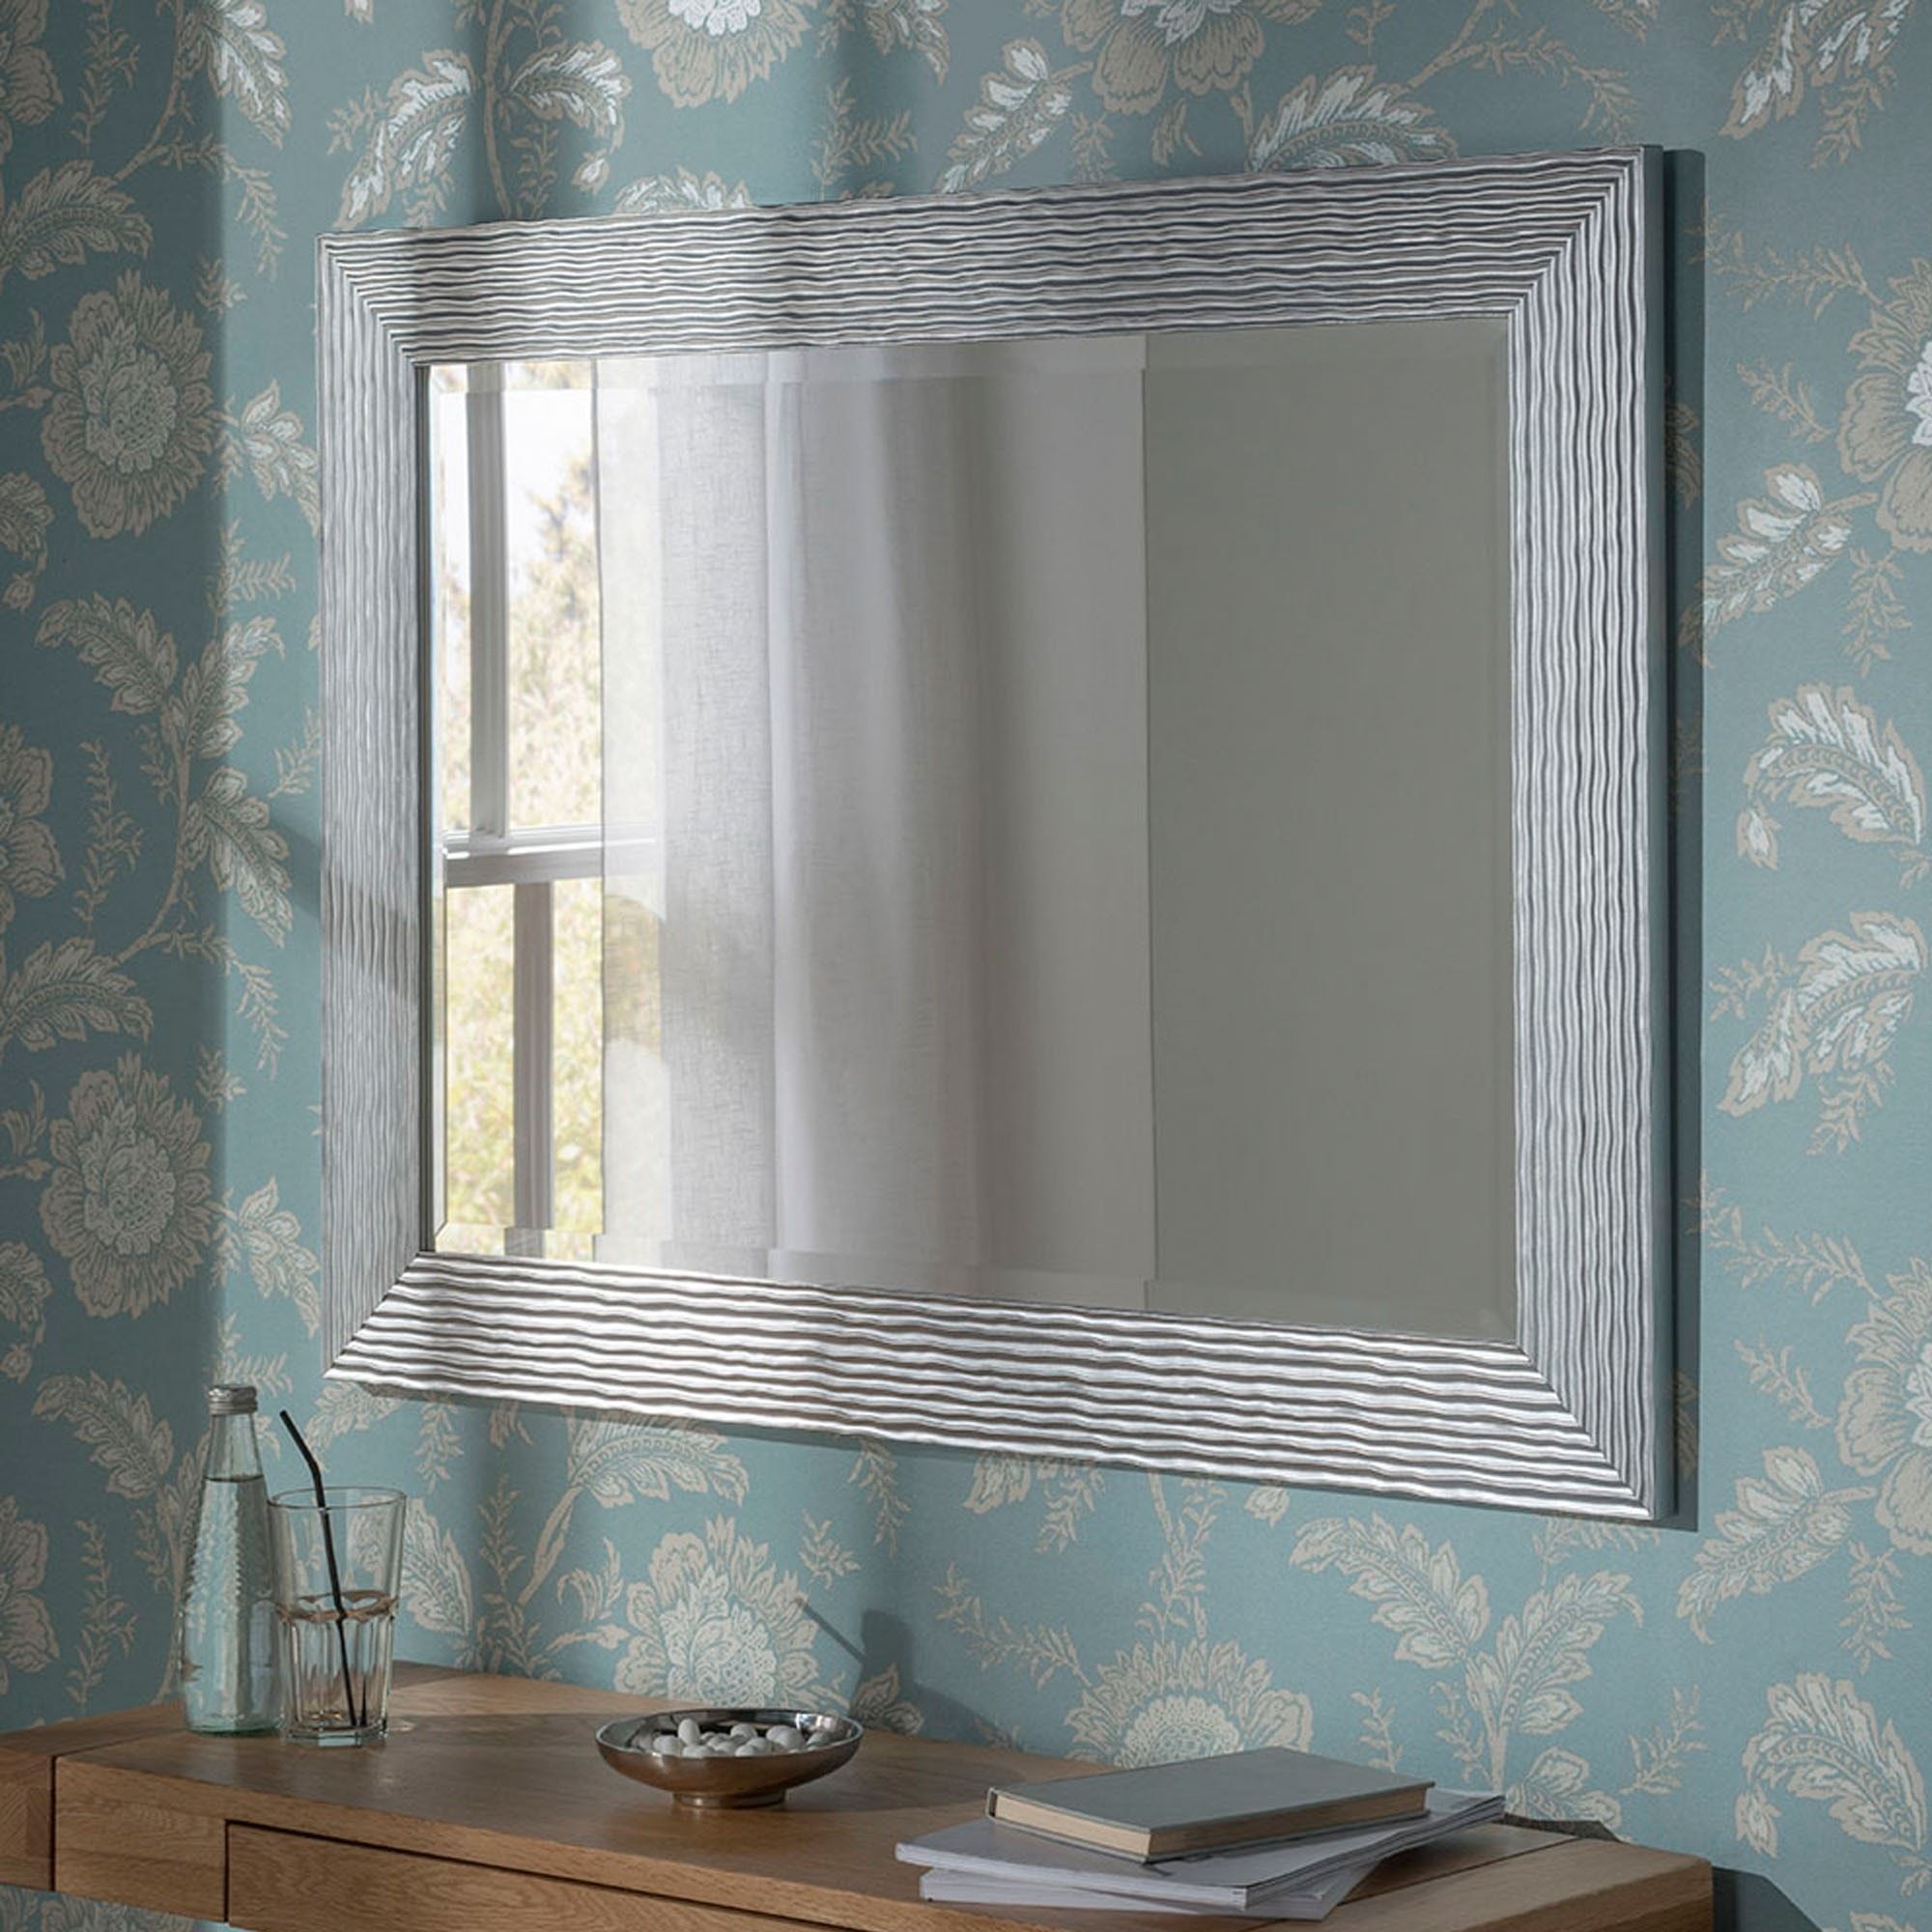 Rectangular Silver Decorative Mirror | Decorative Mirrors In Accent Wall Mirrors (View 4 of 15)